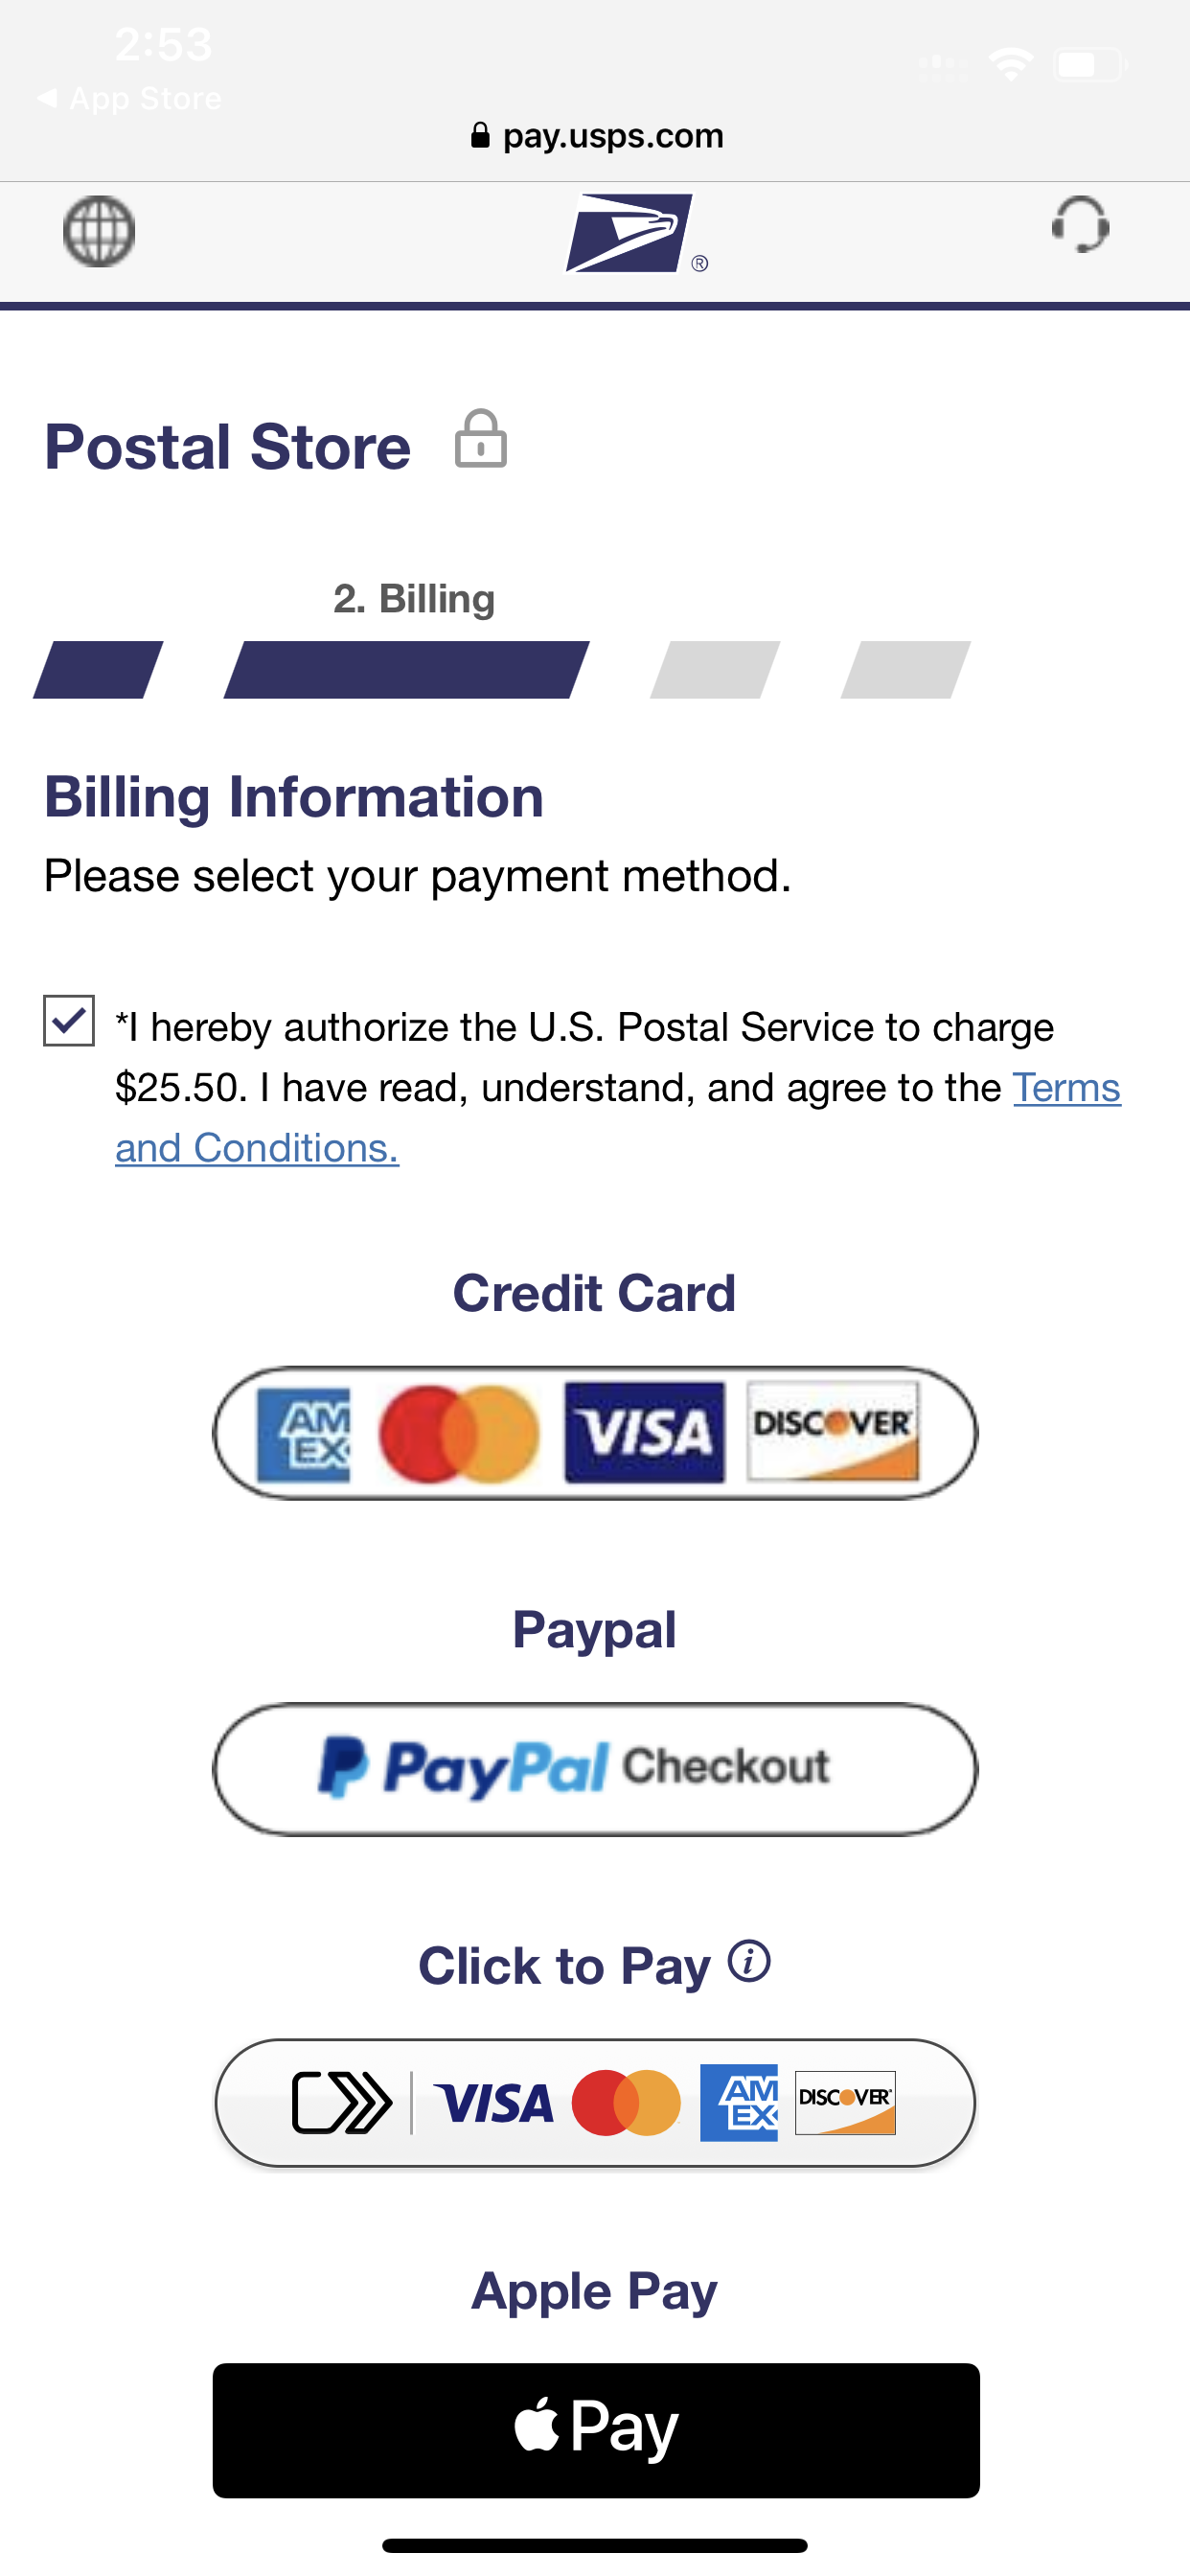 USPS accepts Apple Pay in its app and on its website.